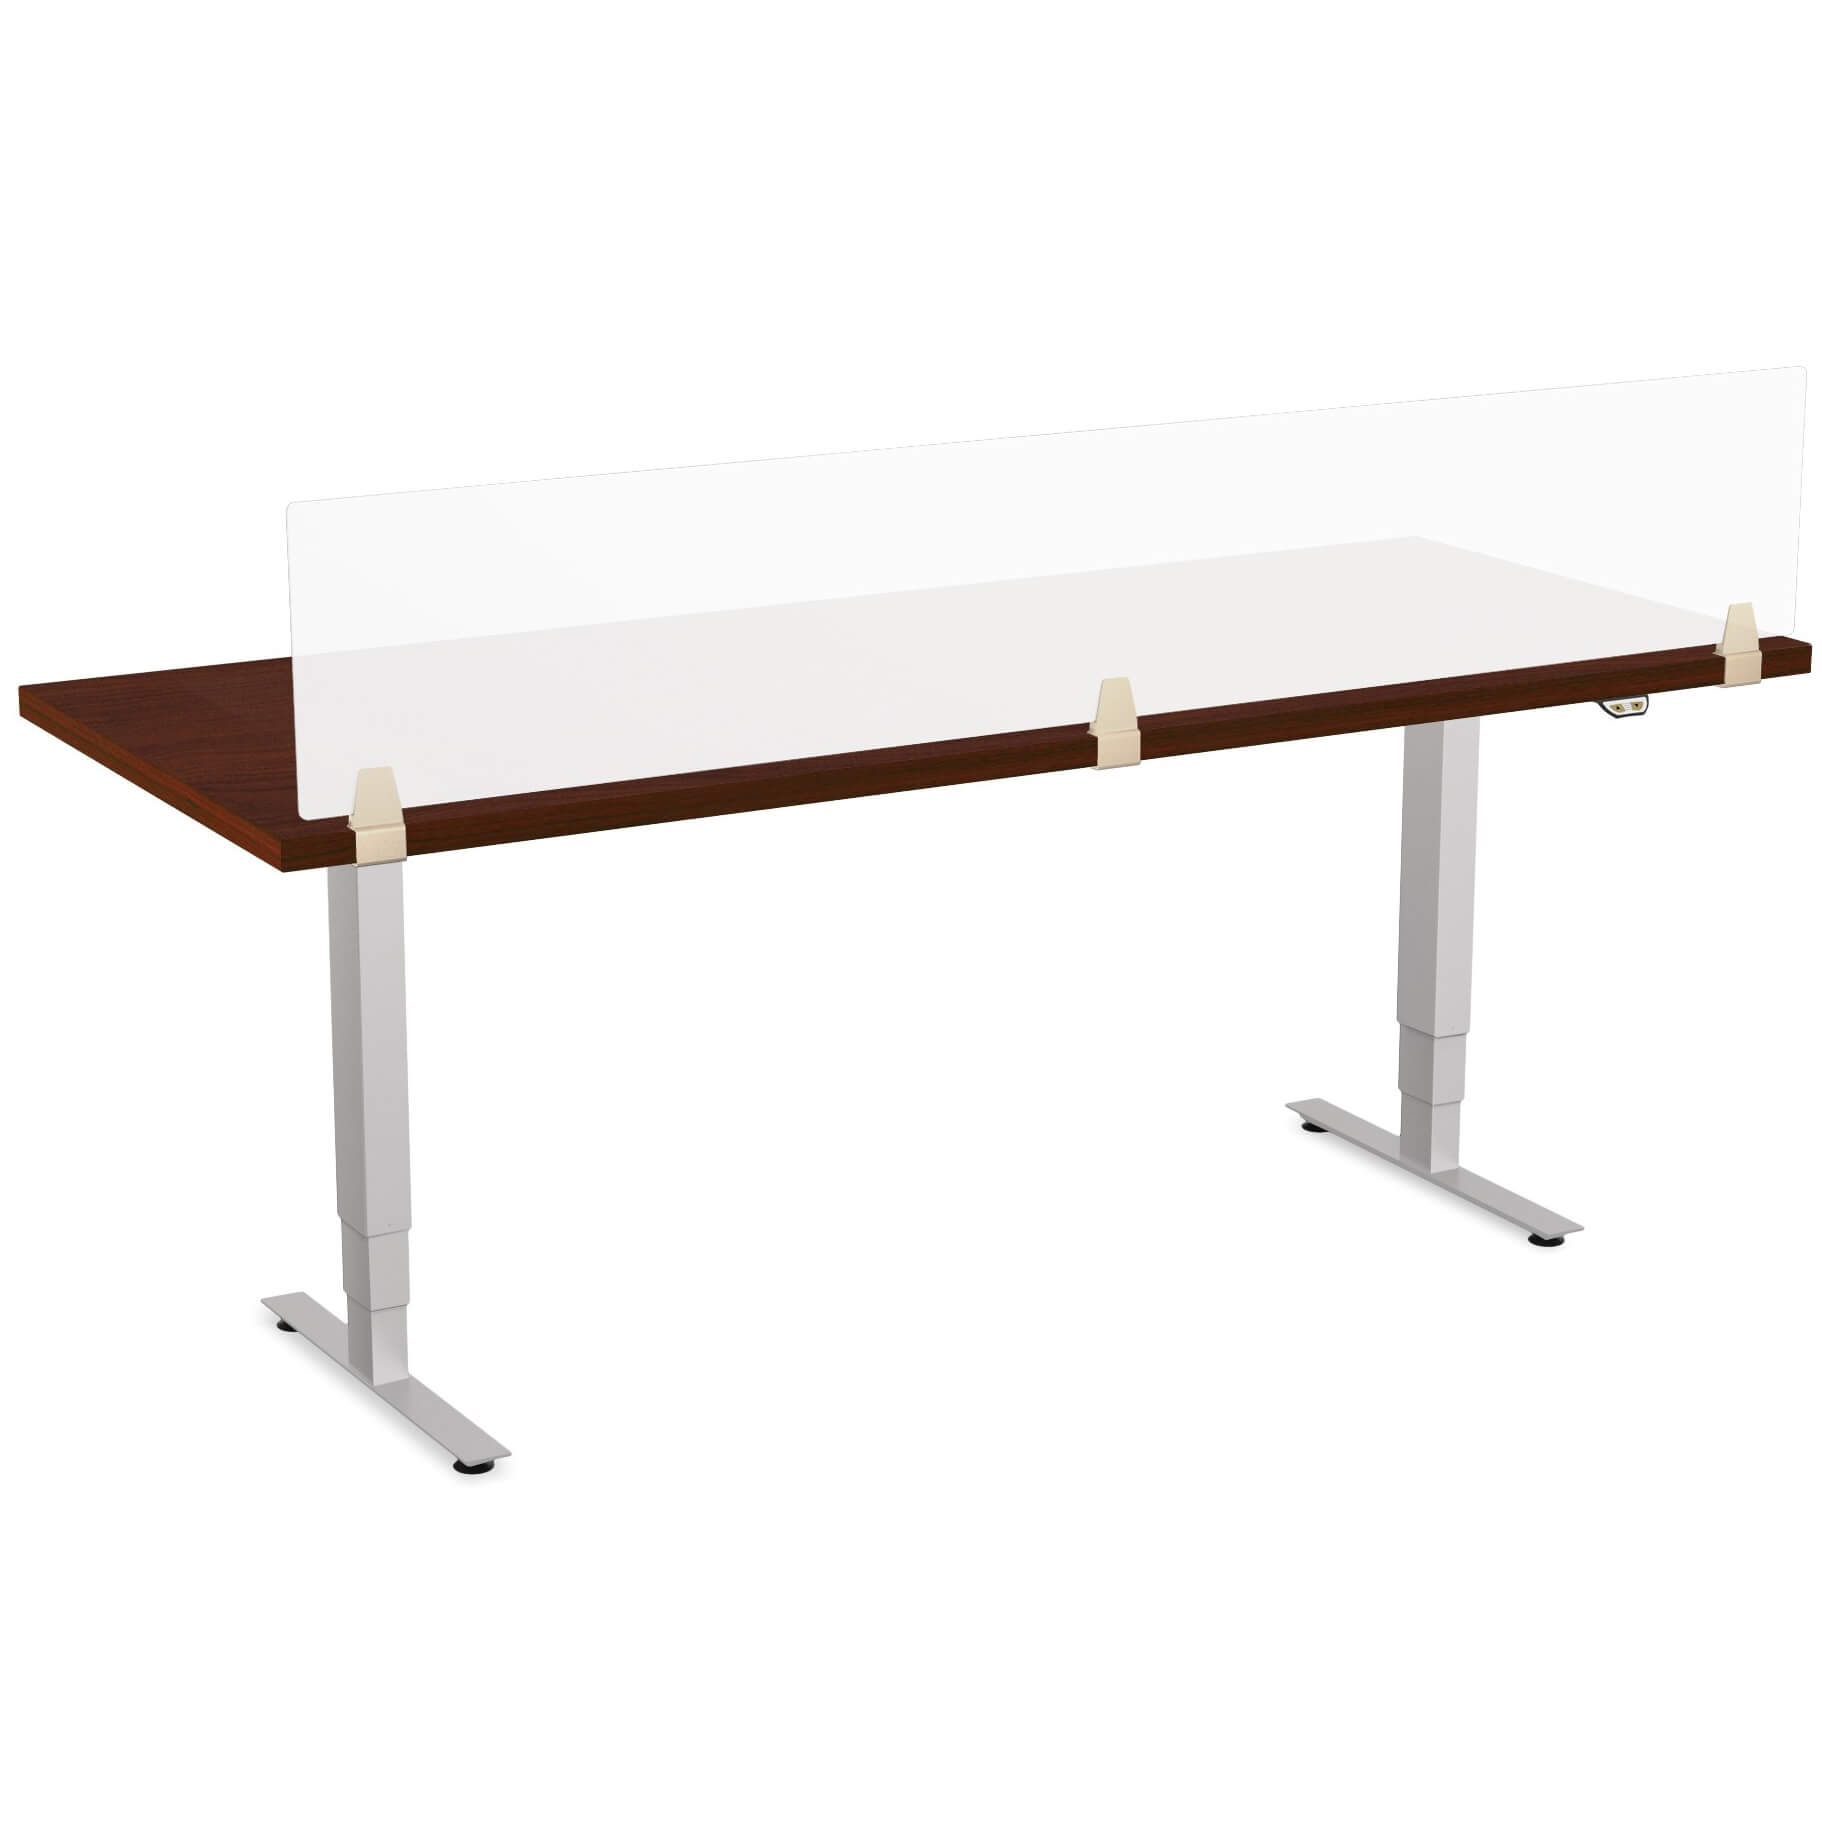 sit-stand-desk-height-adjustable-office-table-1-2-3.jpg